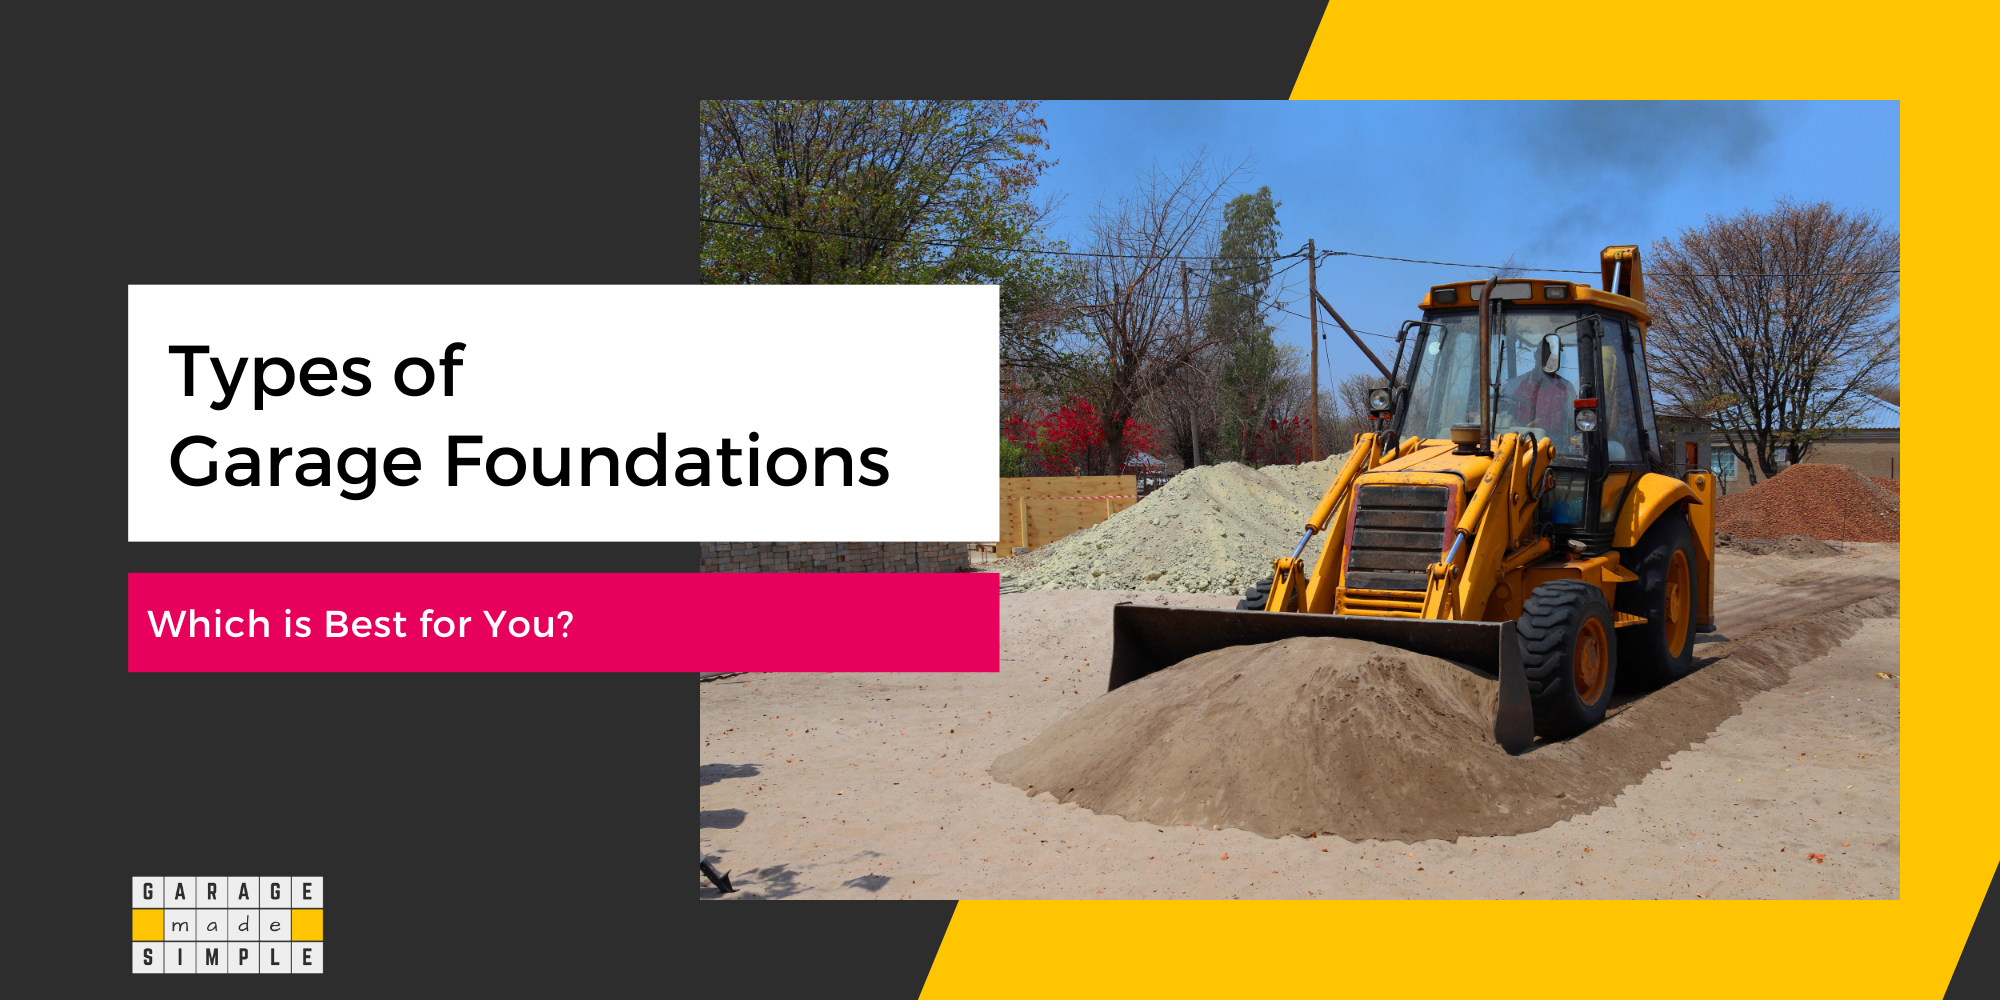 8 Types of Garage Foundations: Which is Best for You?